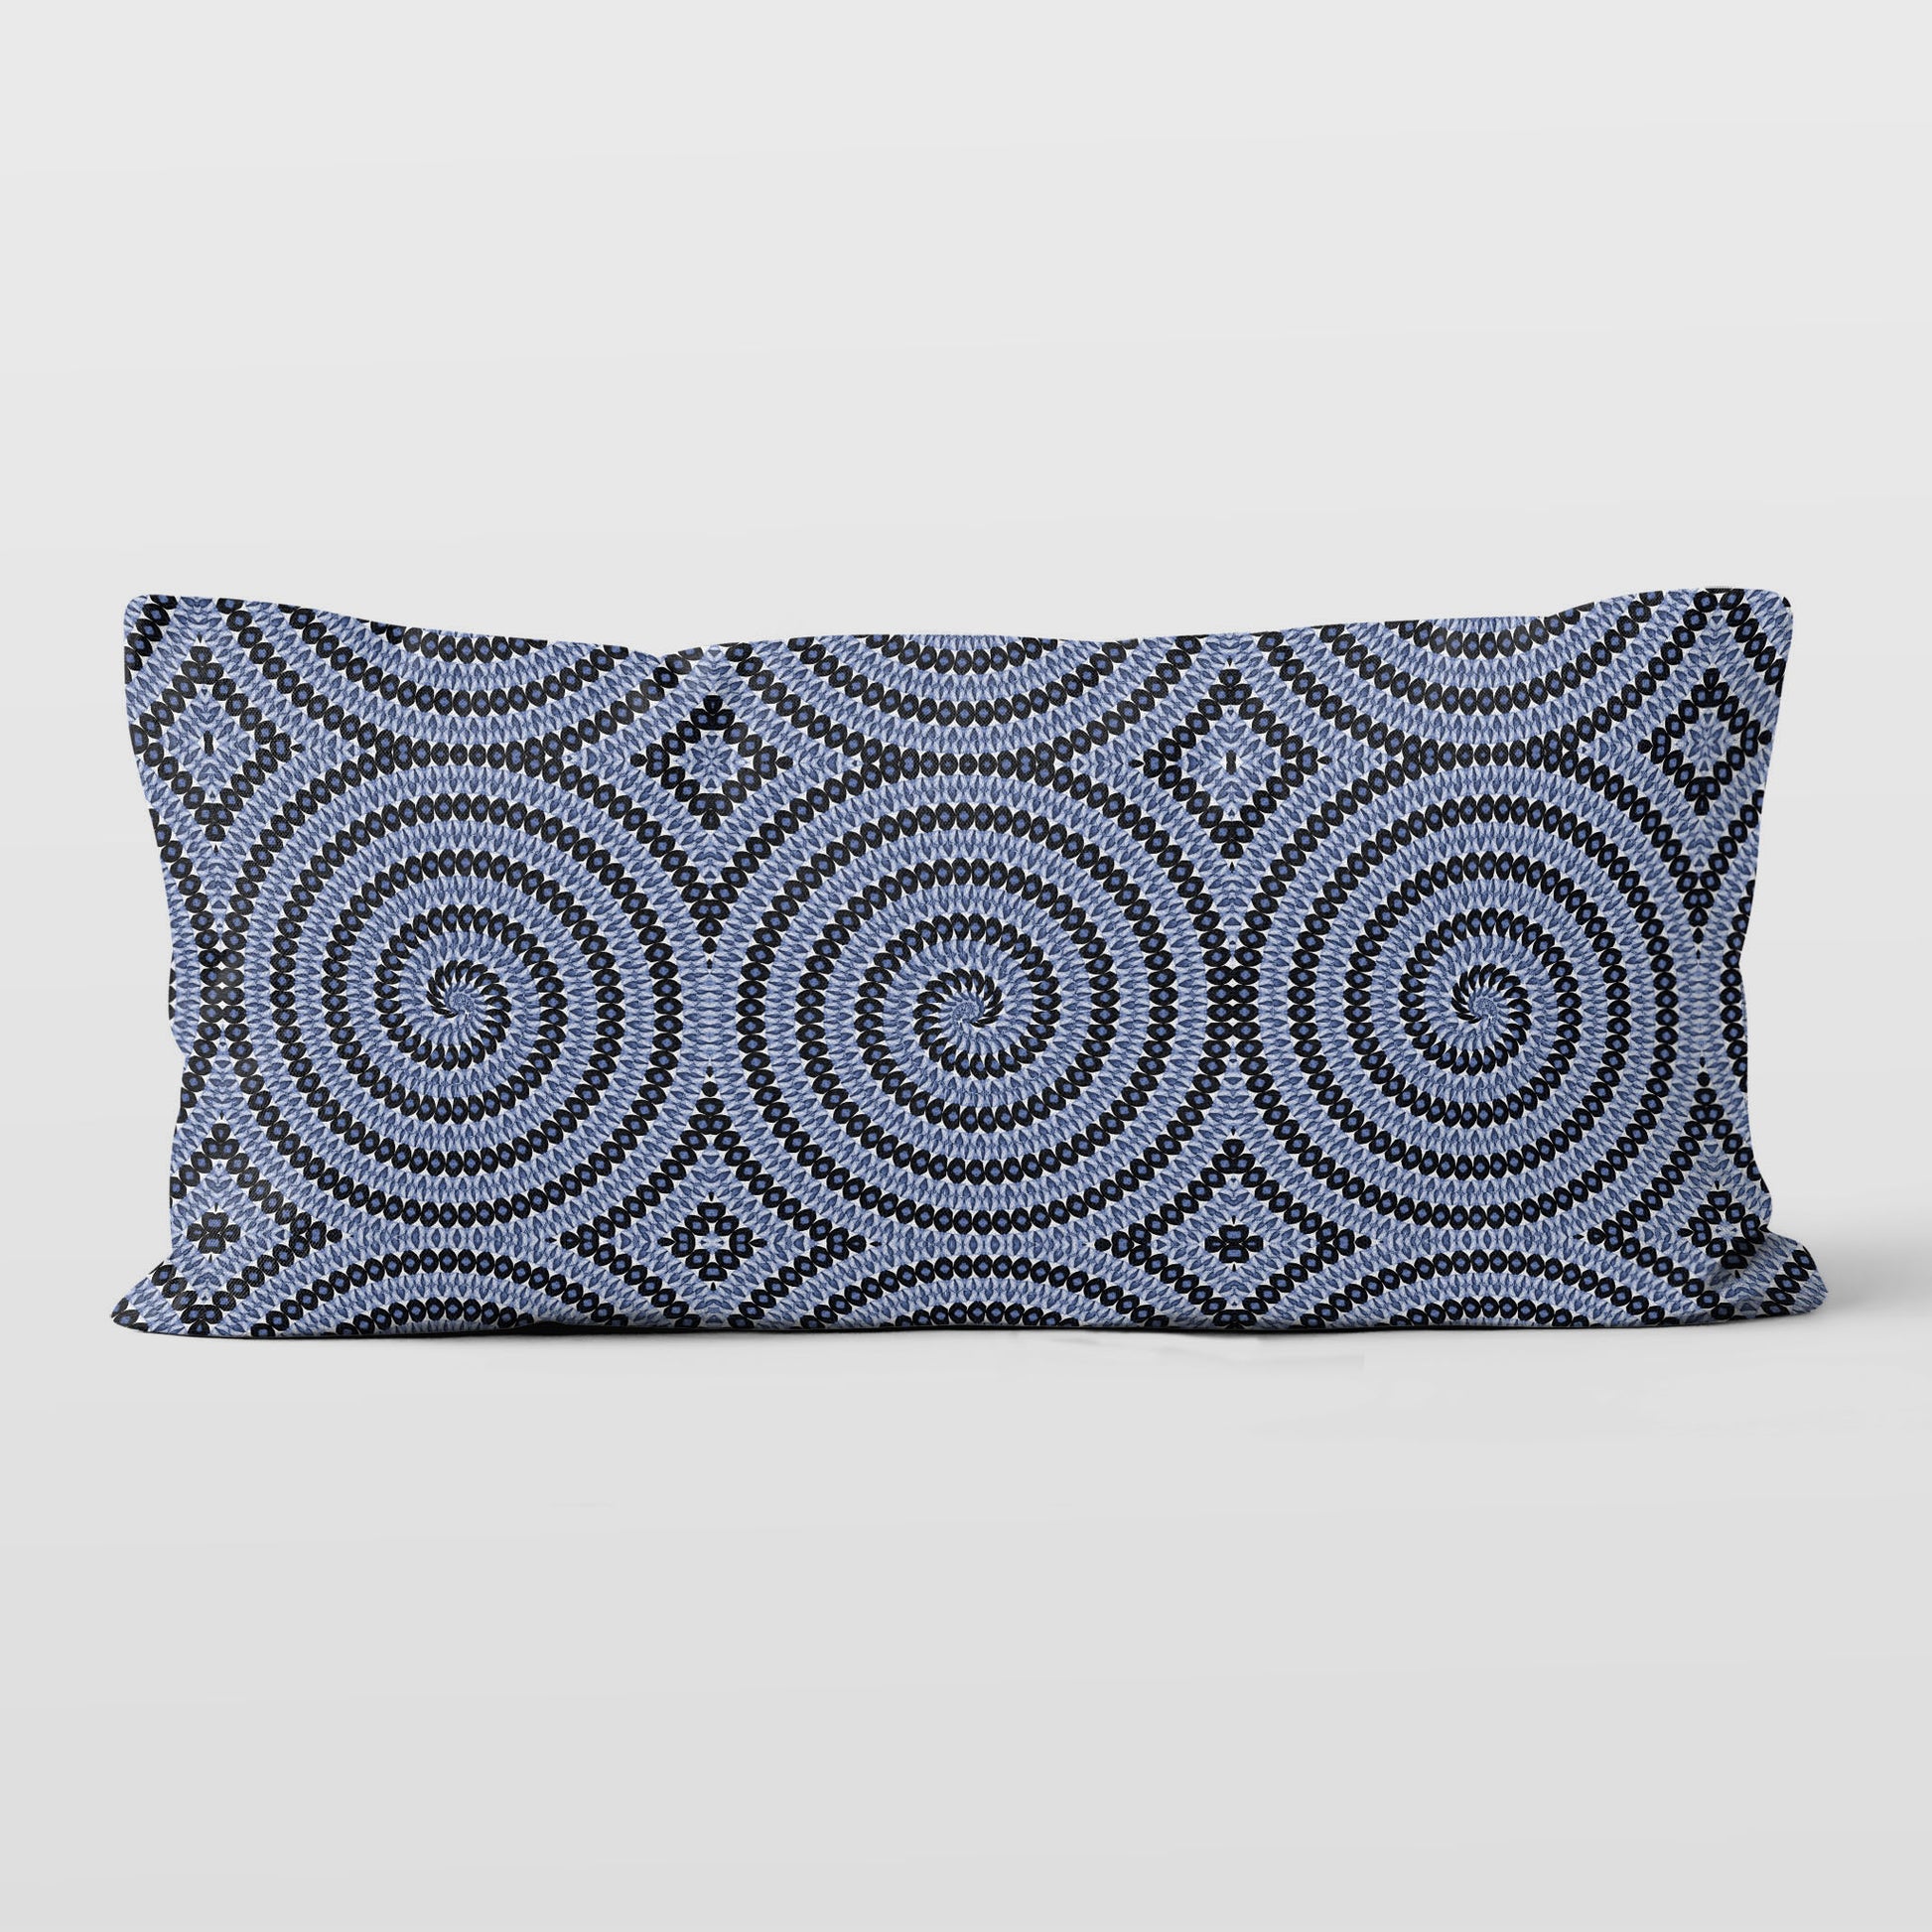 Rectangular lumbar pillow featuring hand-painted and collaged blue and white spiral pattern.